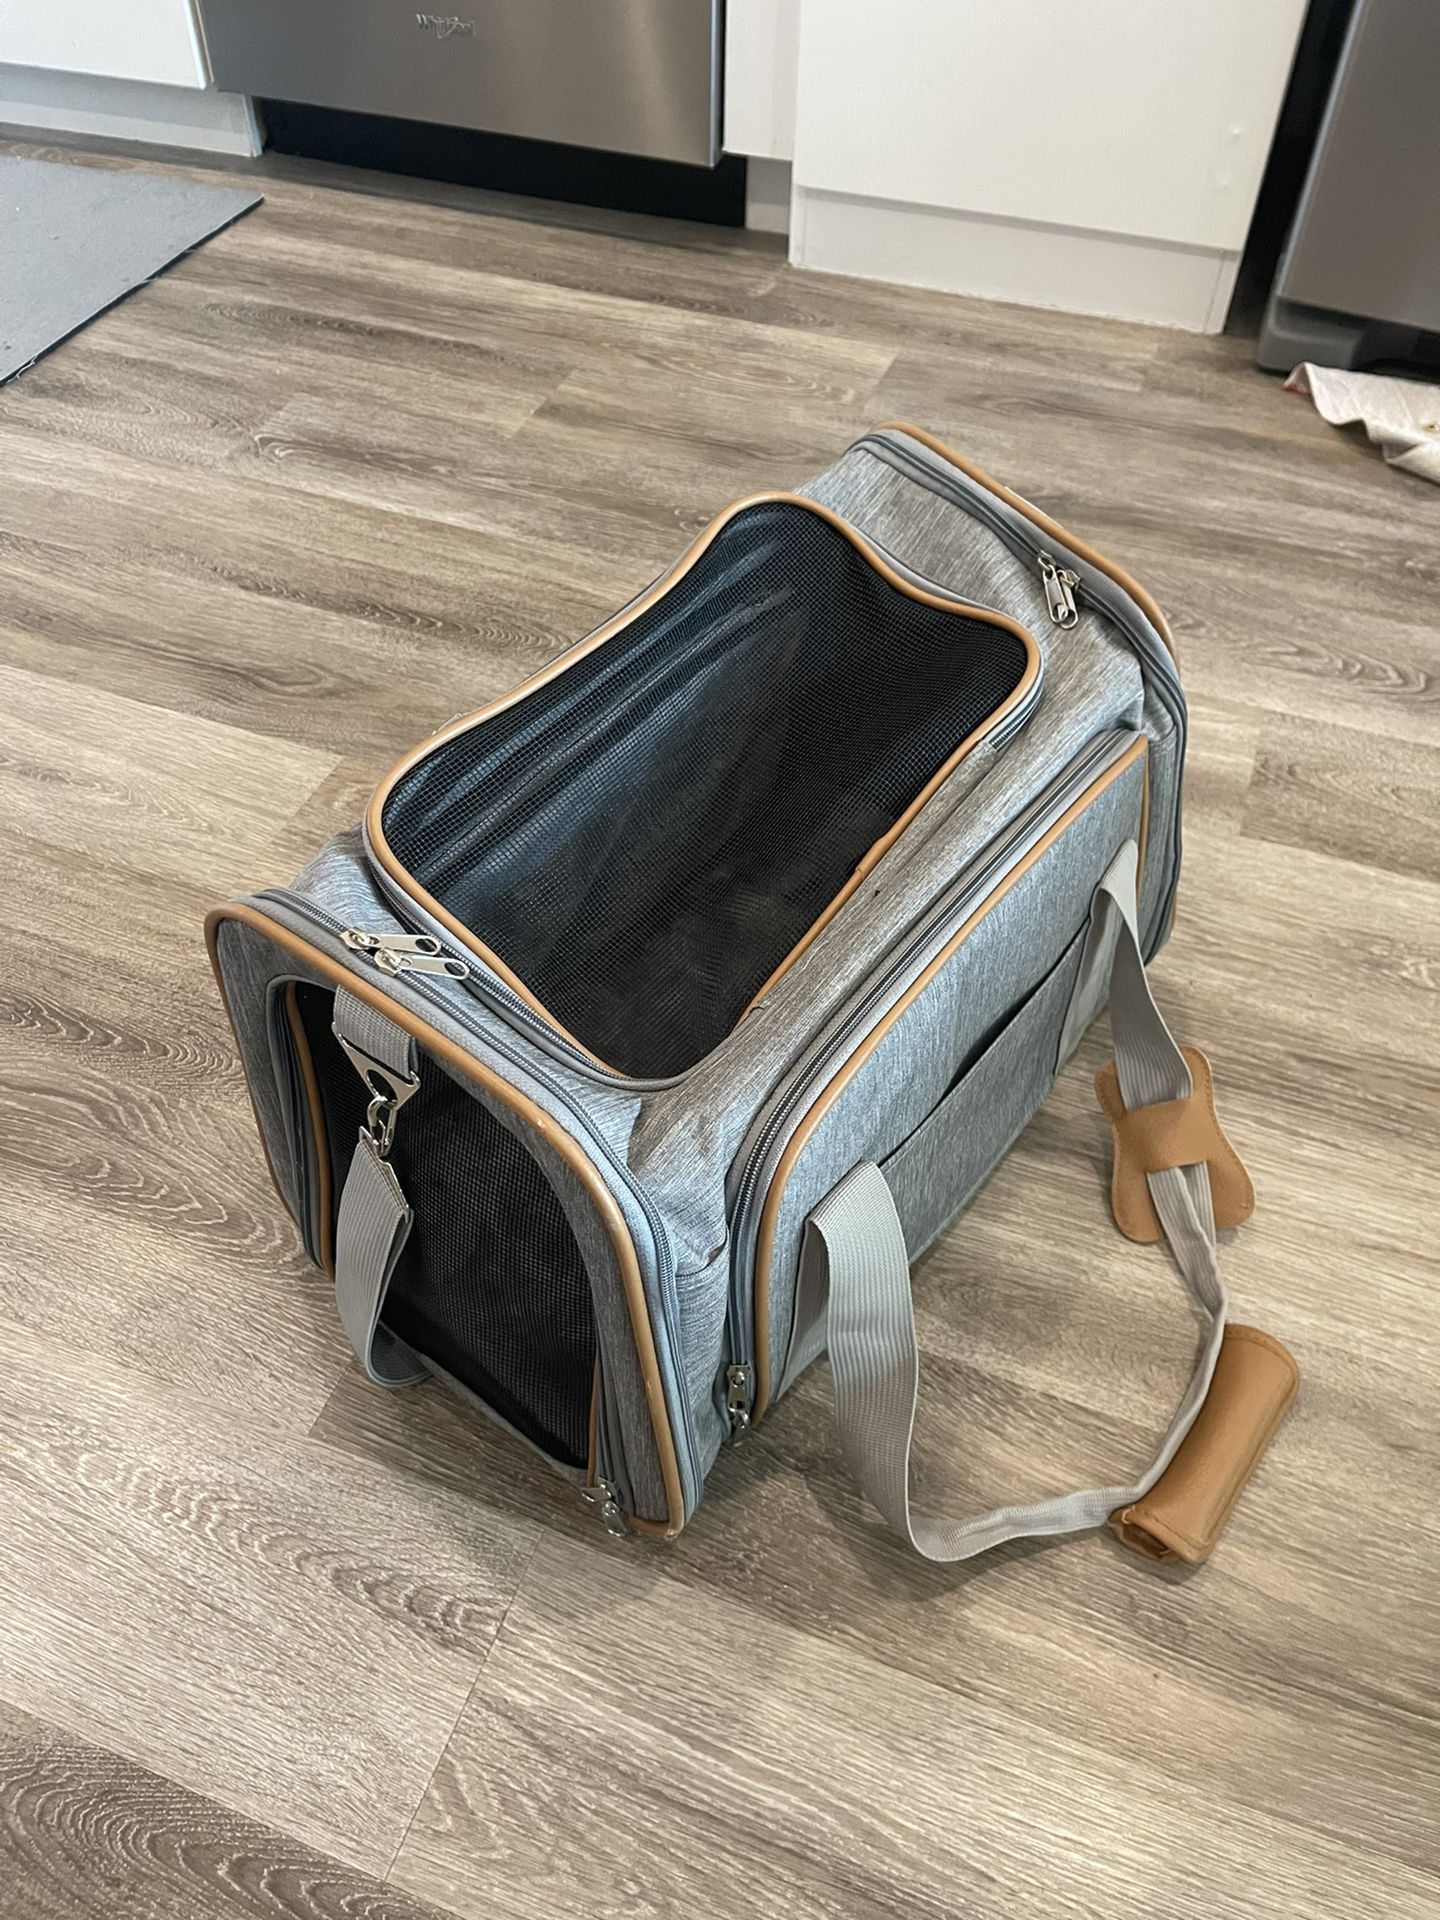 Premium Airline Approved Expandable Pet Carrier by Pet Peppy- Two Side Expansion, Designed for Cats, Dogs, Kittens,Puppies $60